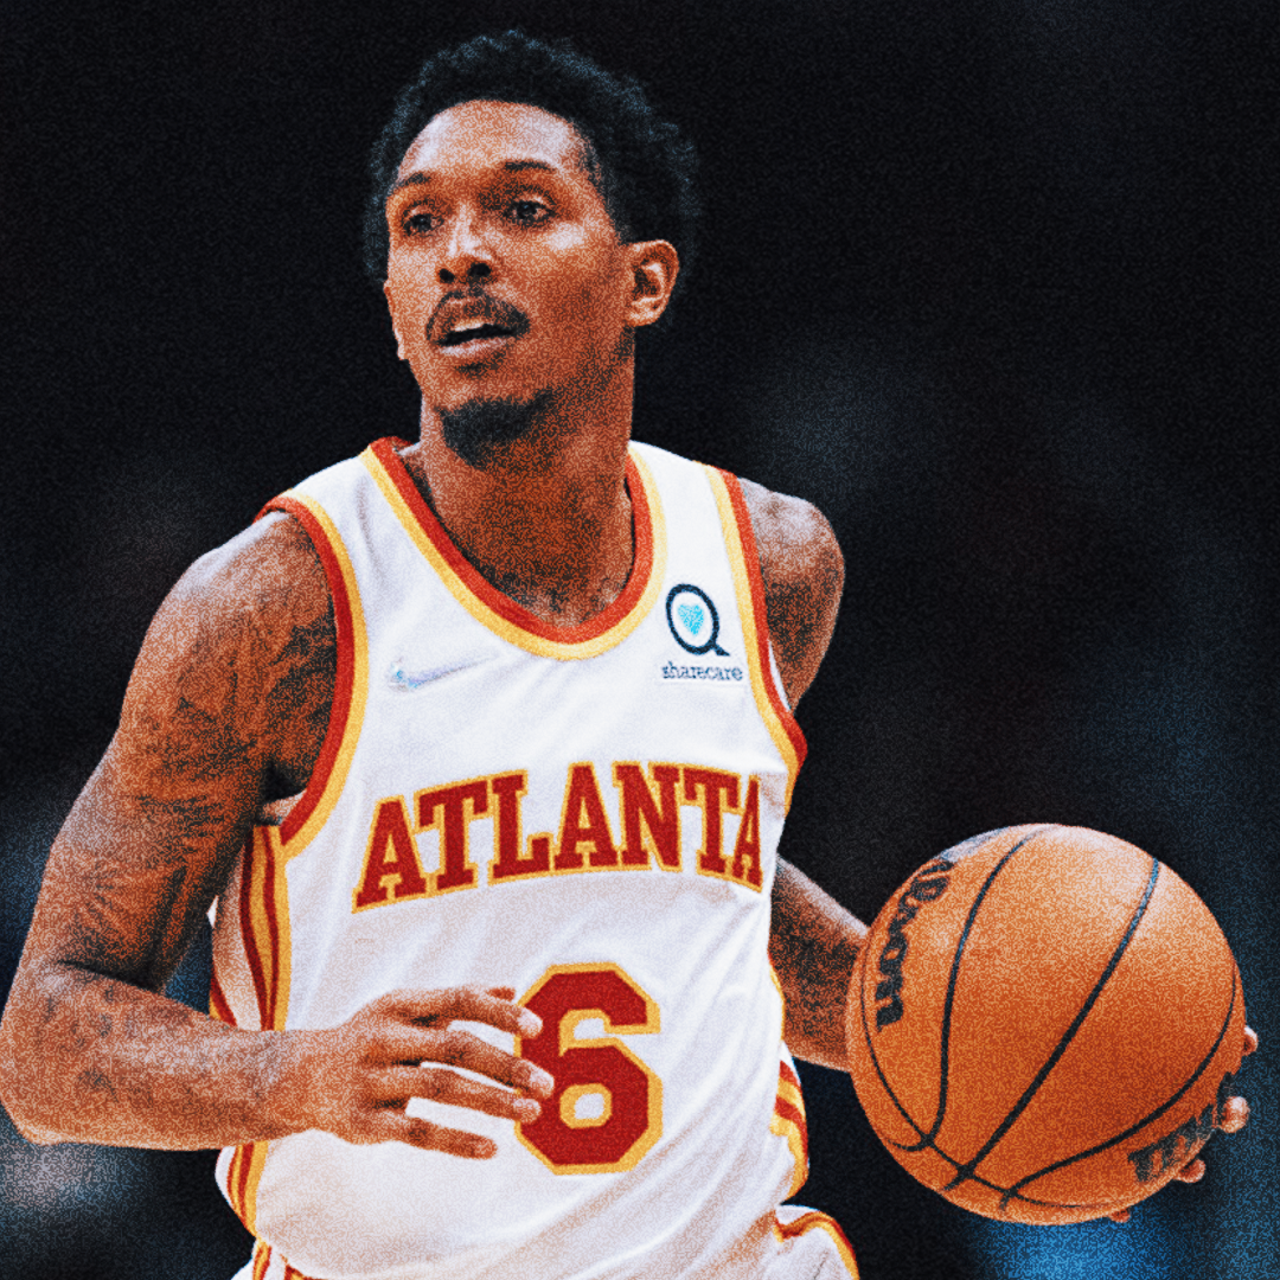 Lou Williams announced his retirement from the NBA